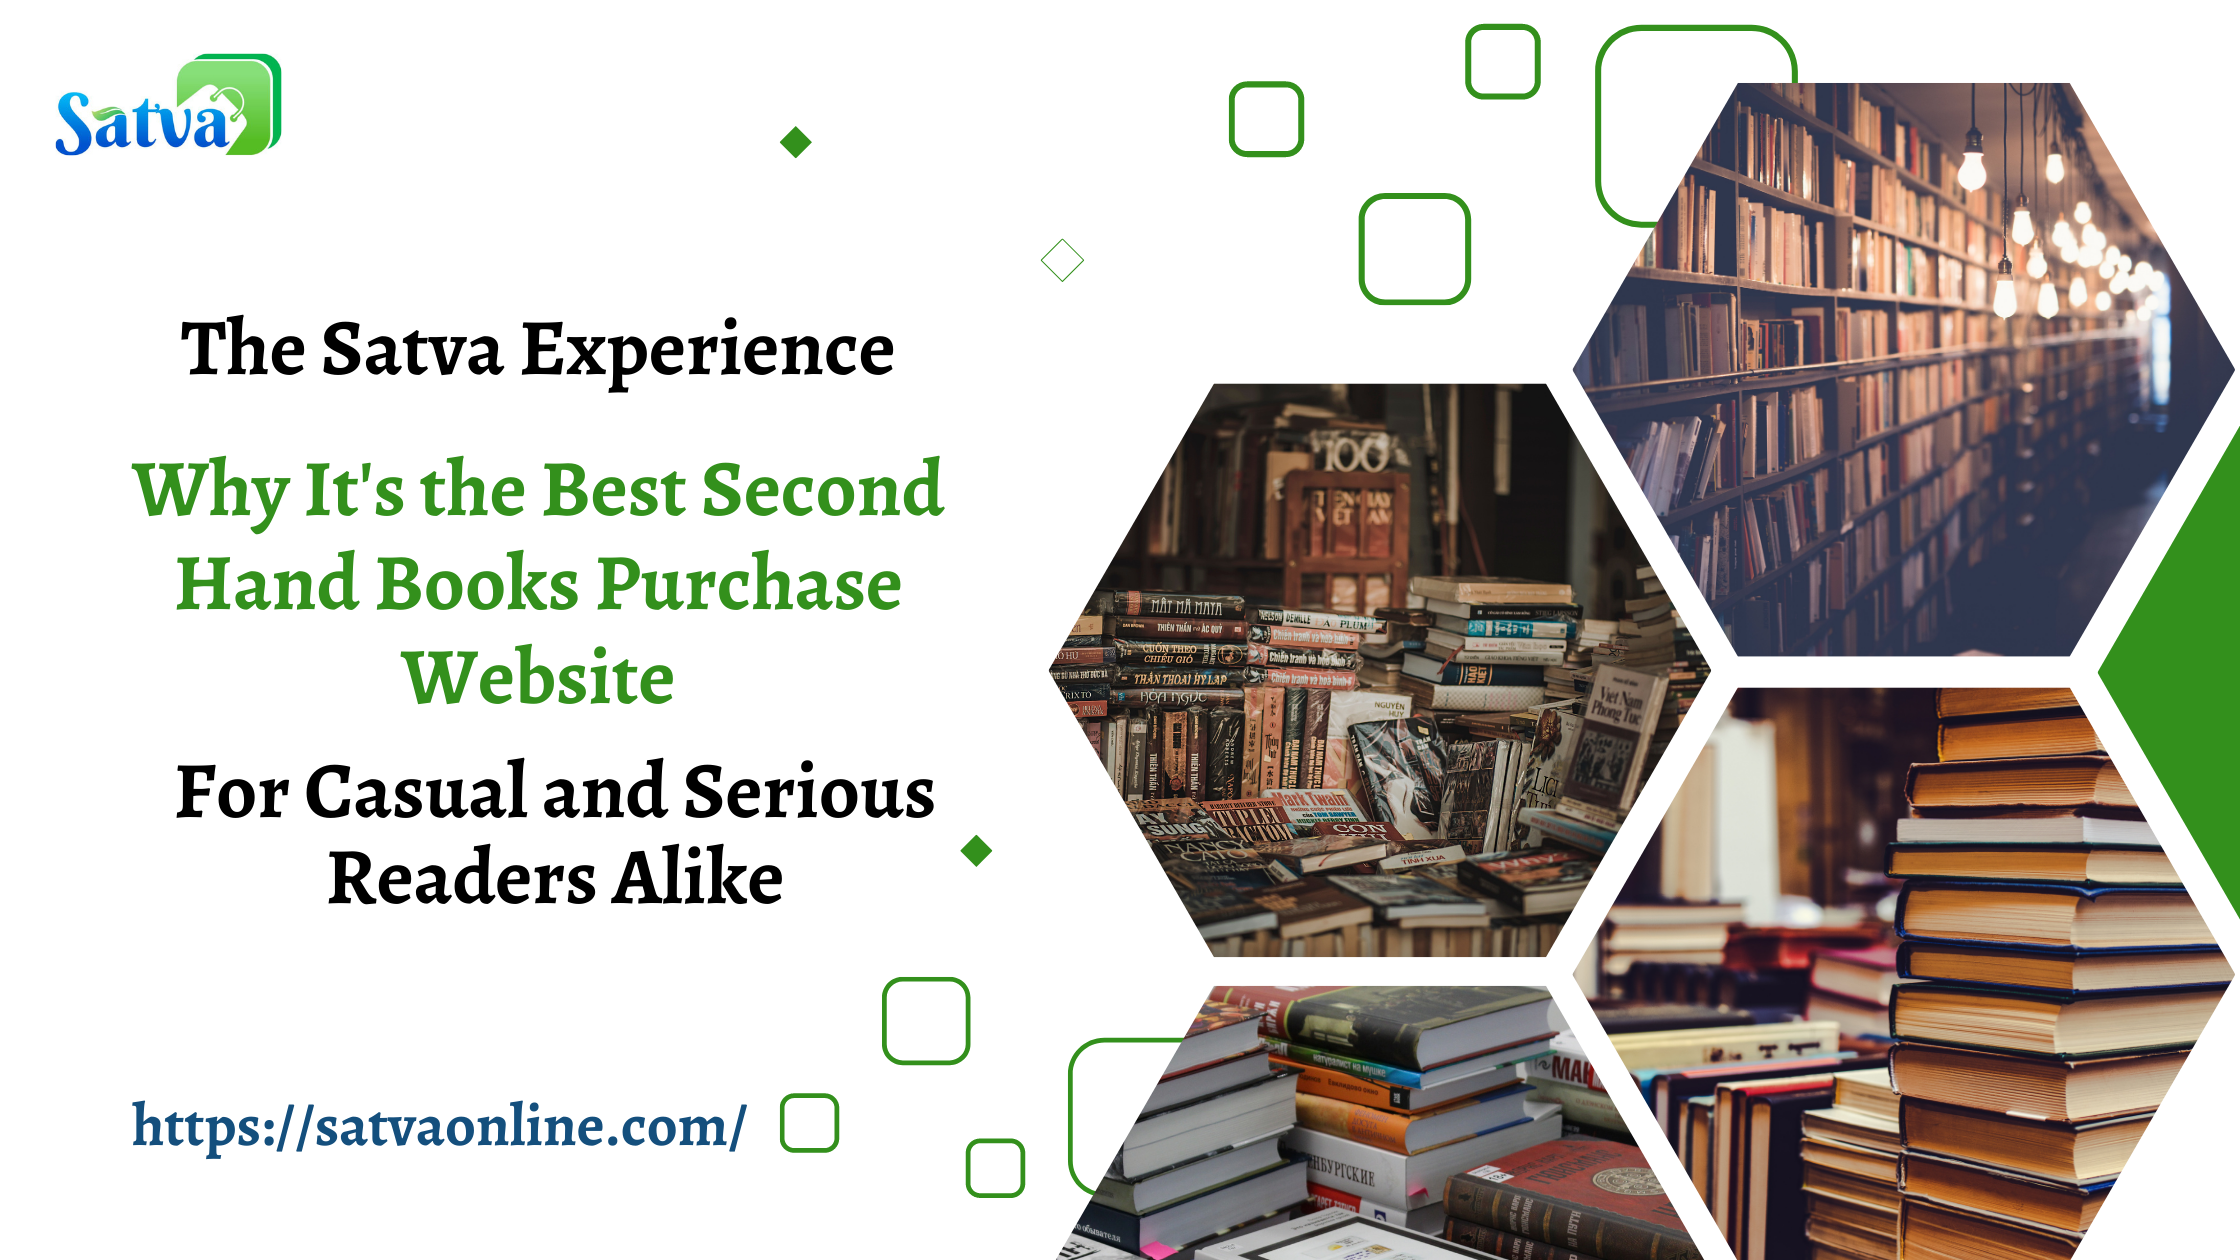 Find the best second hand books purchase website for casual and serious readers. Explore The Satva Experience with its vast collection, user-friendly interface, competitive pricing, and community engagement. Start reading Affordable today!